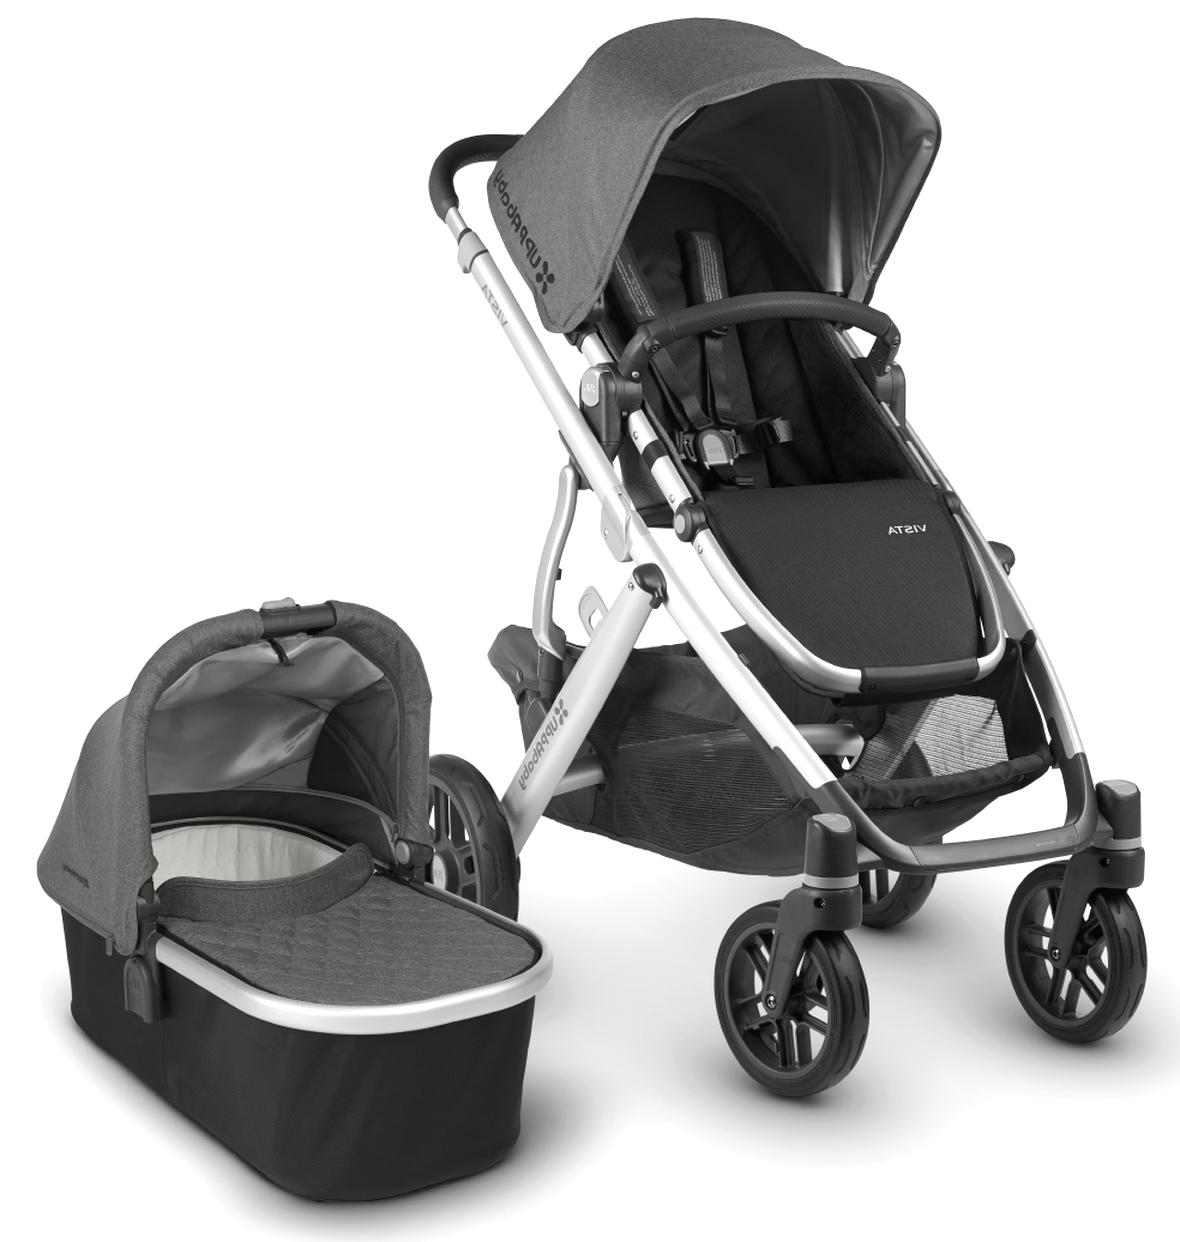 uppababy vista double used for sale